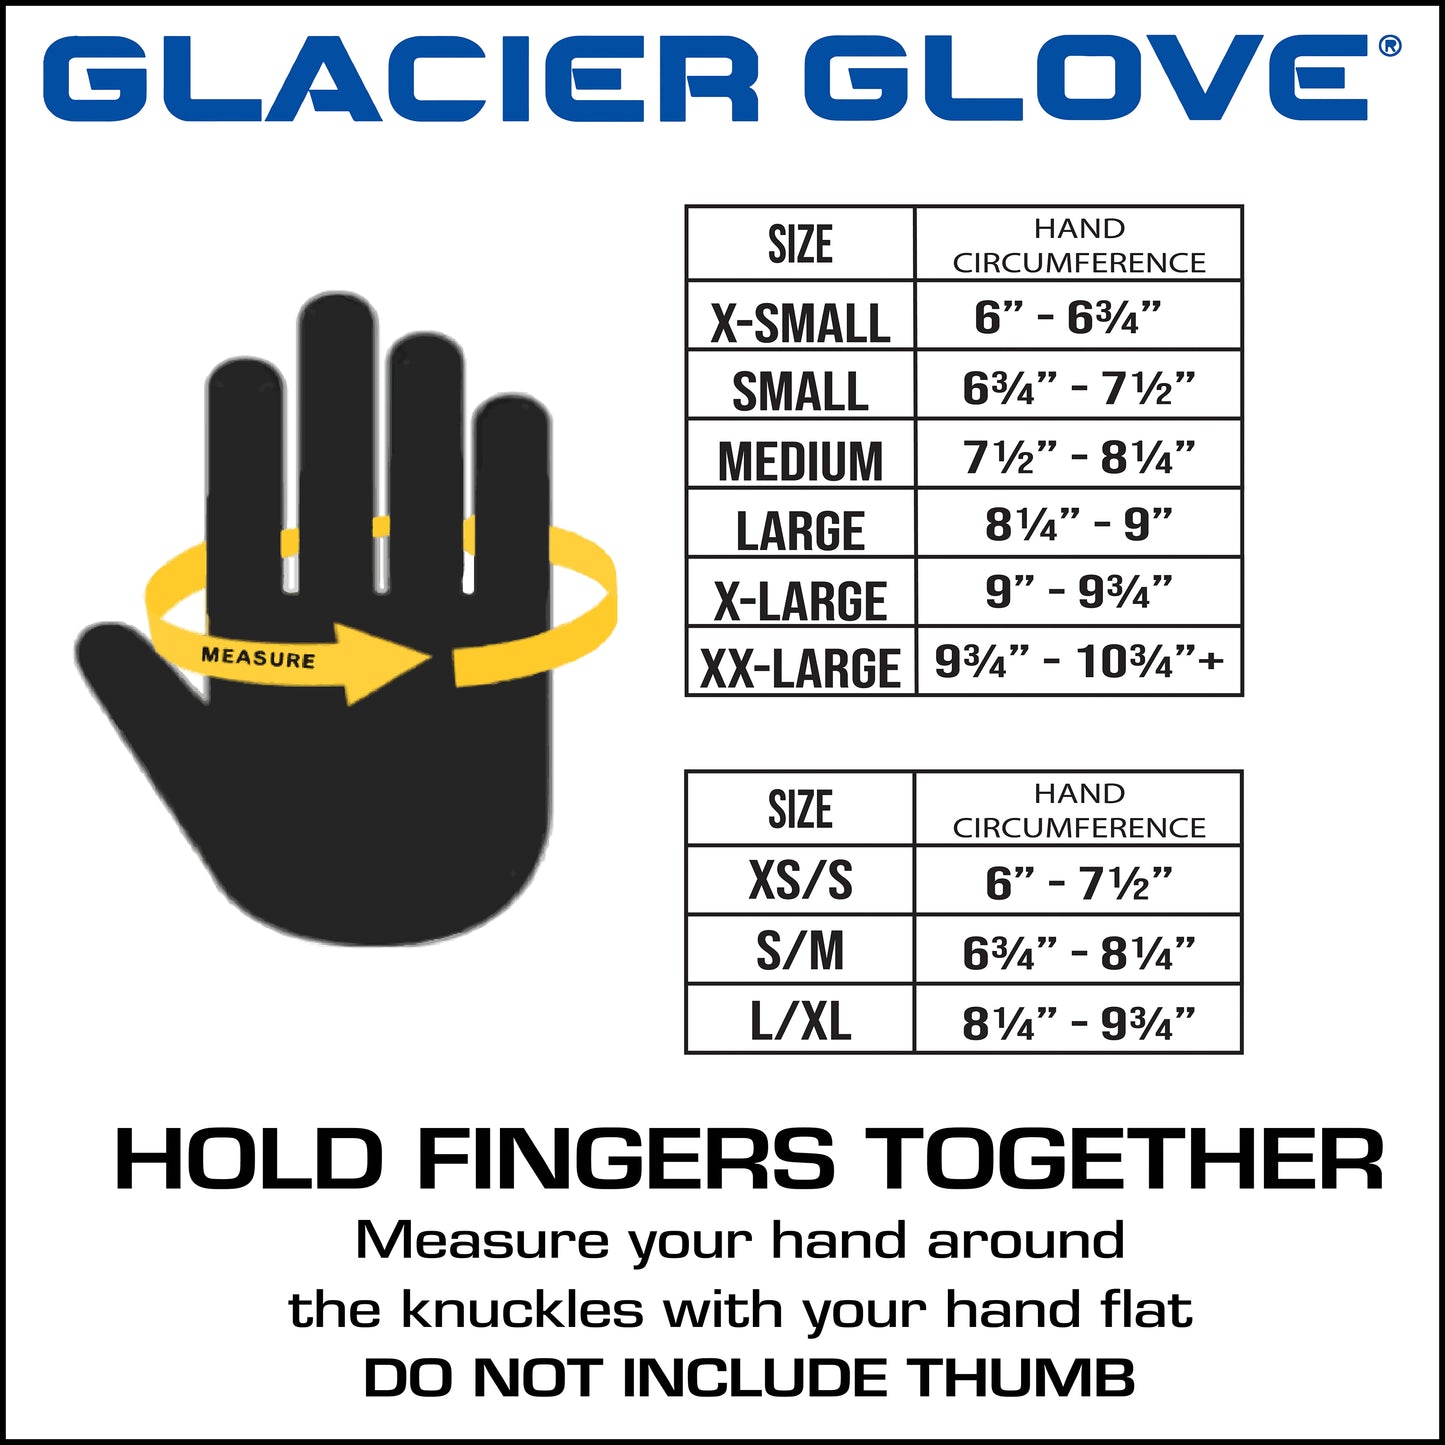 The Guide Glove is designed with a focus on protection and performance. Its durability and functionality combined with dexterity and comfort makes this glove the perfect choice for rugged outdoor environments.